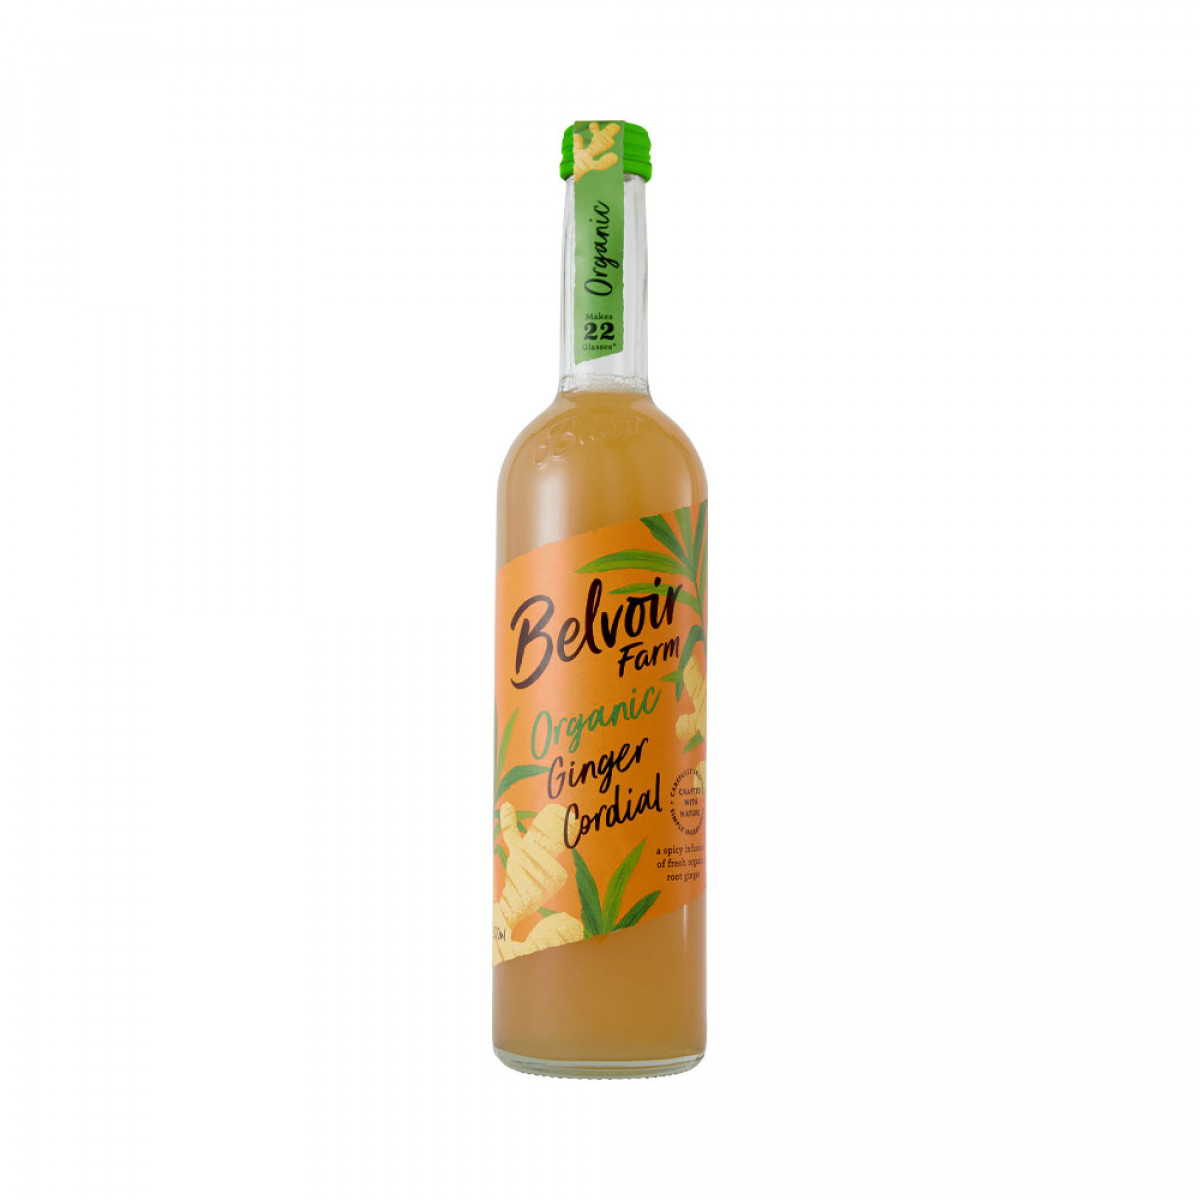 Product picture for Ginger Cordial